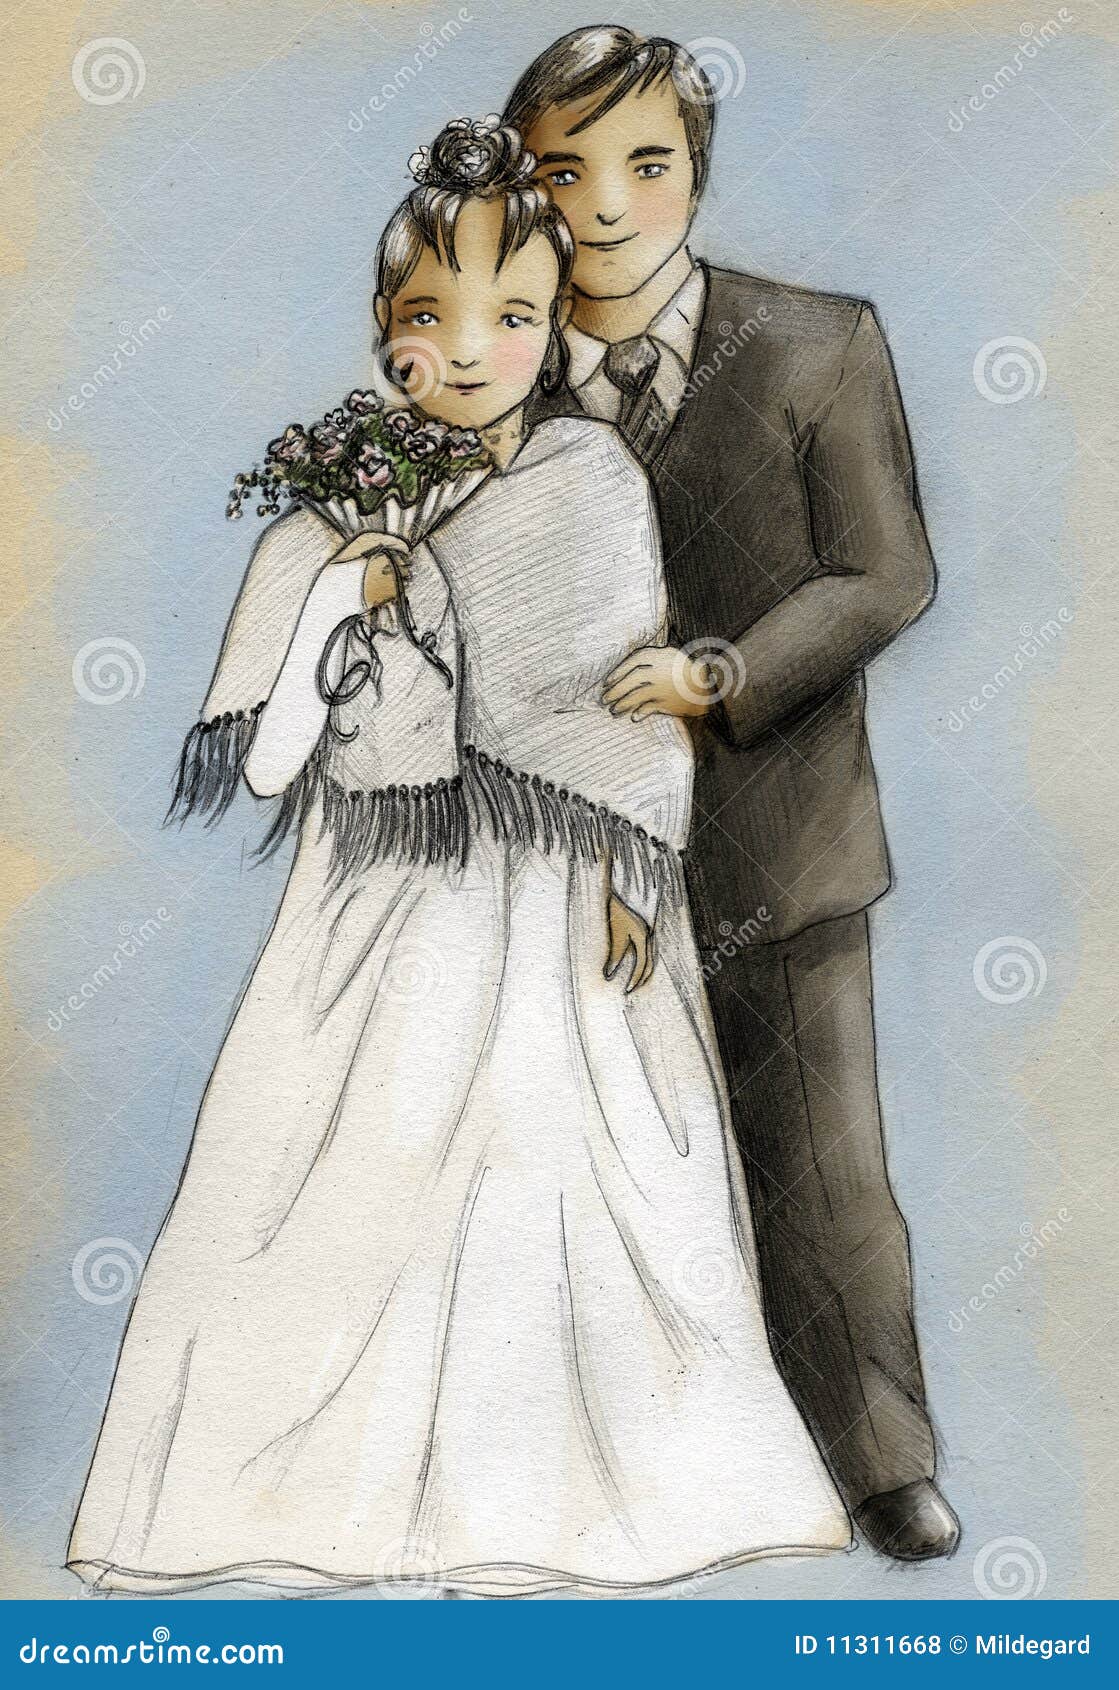 A plain sketch of a wedding ceremony Illustration of a plain sketch of a  wedding ceremony on a white background  CanStock